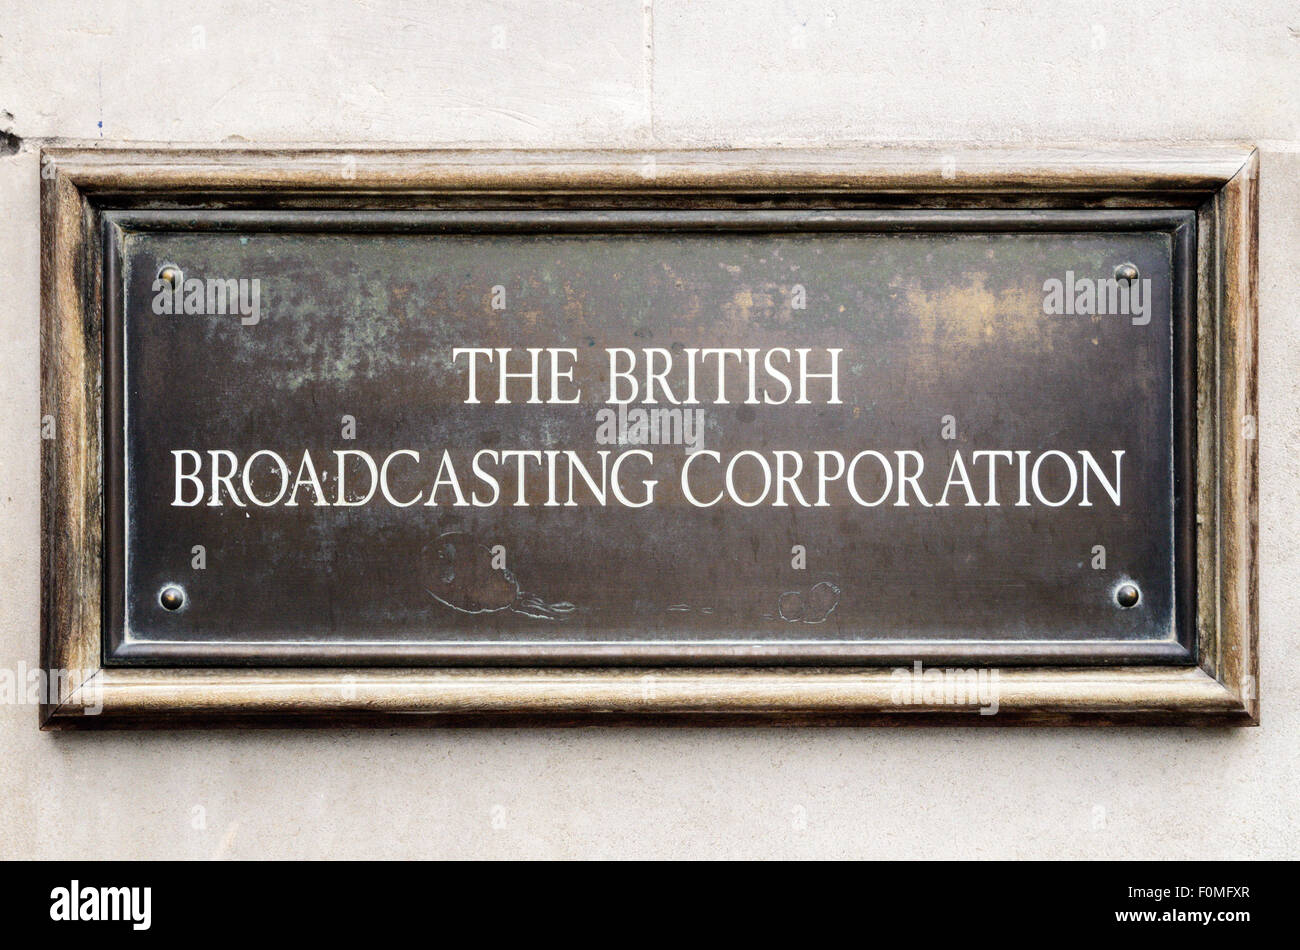 The sign for The British Broadcasting Corporation on the wall of Broadcasting House, Langham Place, London, England, UK. Stock Photo